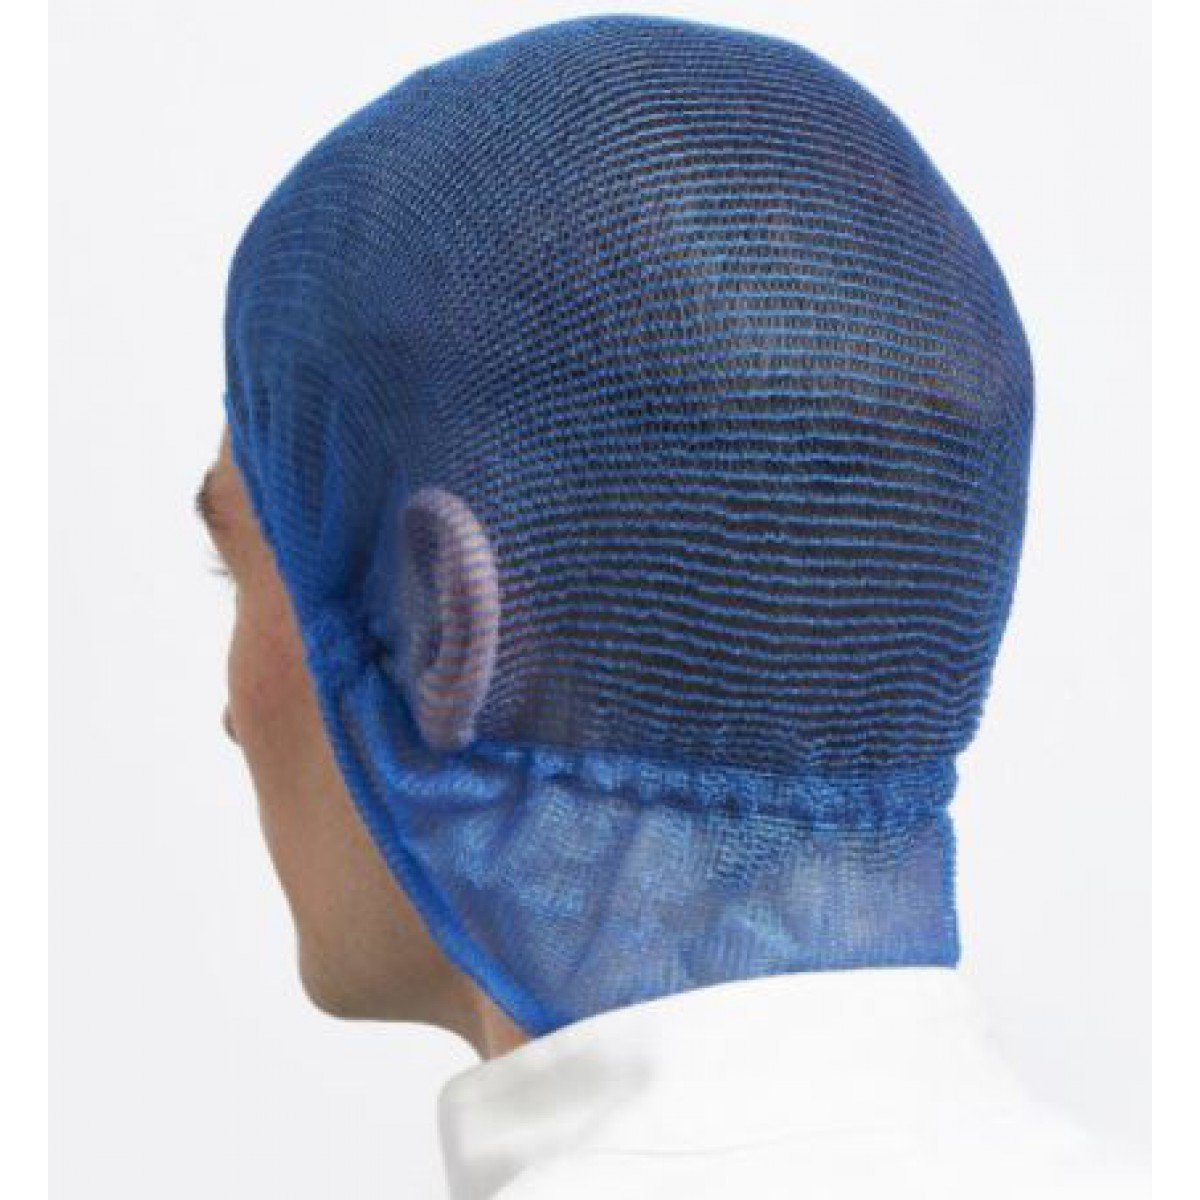 Hairtite HiCare Hairnet with Neck Guard Blue Metal Detectable